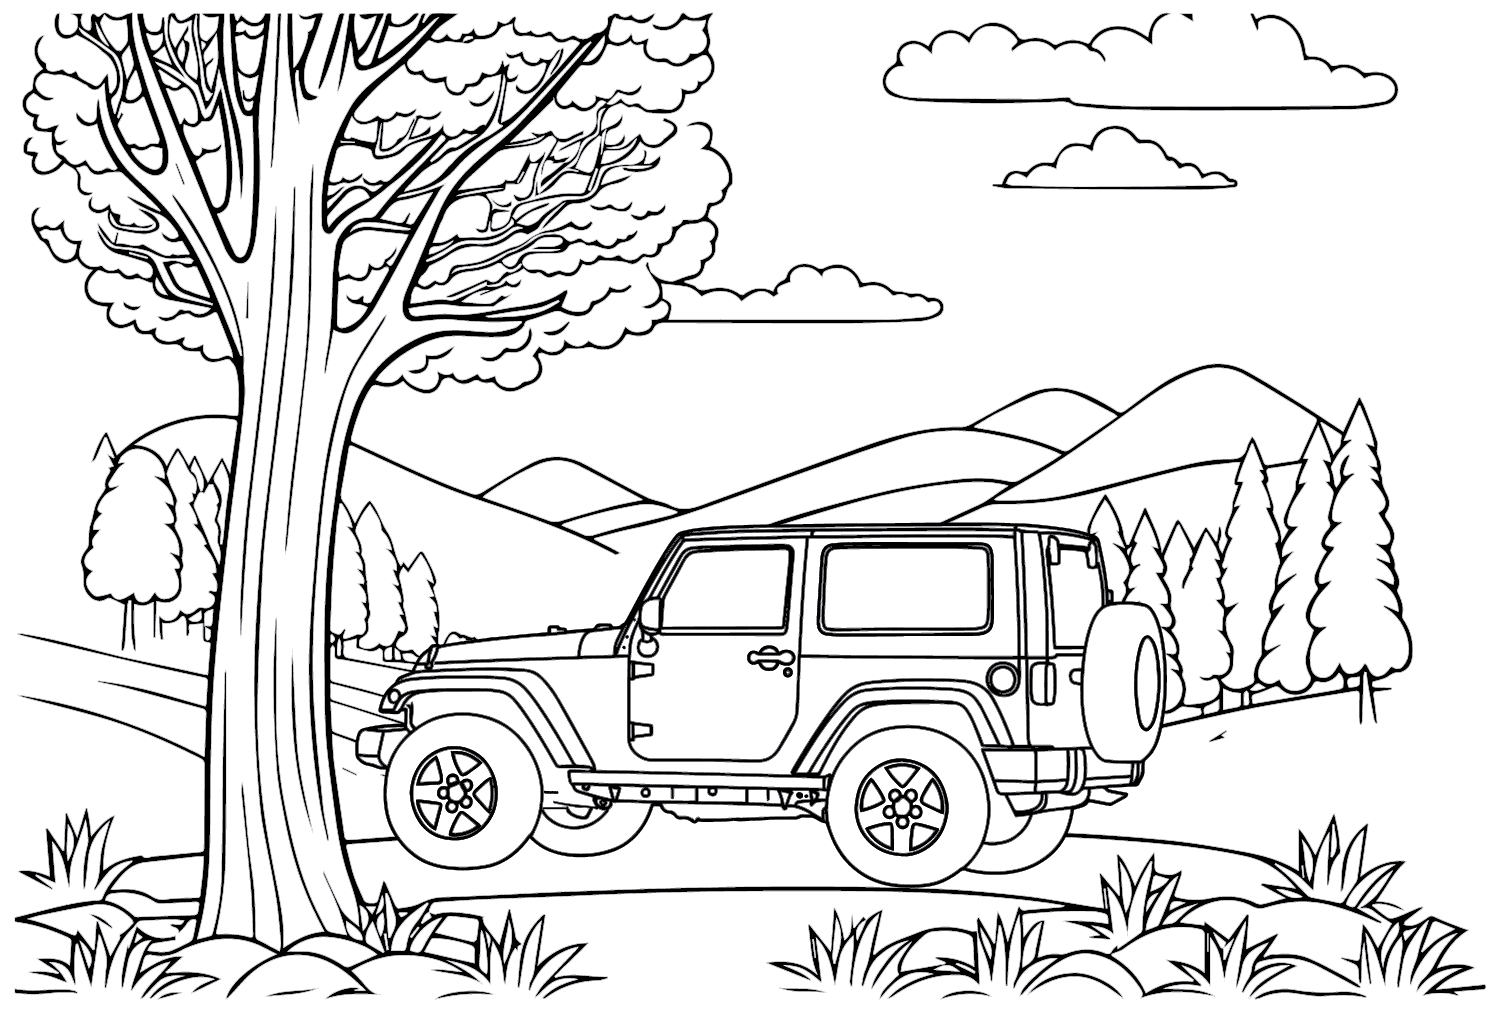 Mercedes-Benz G-Class Coloring Page from Mercedes-Benz